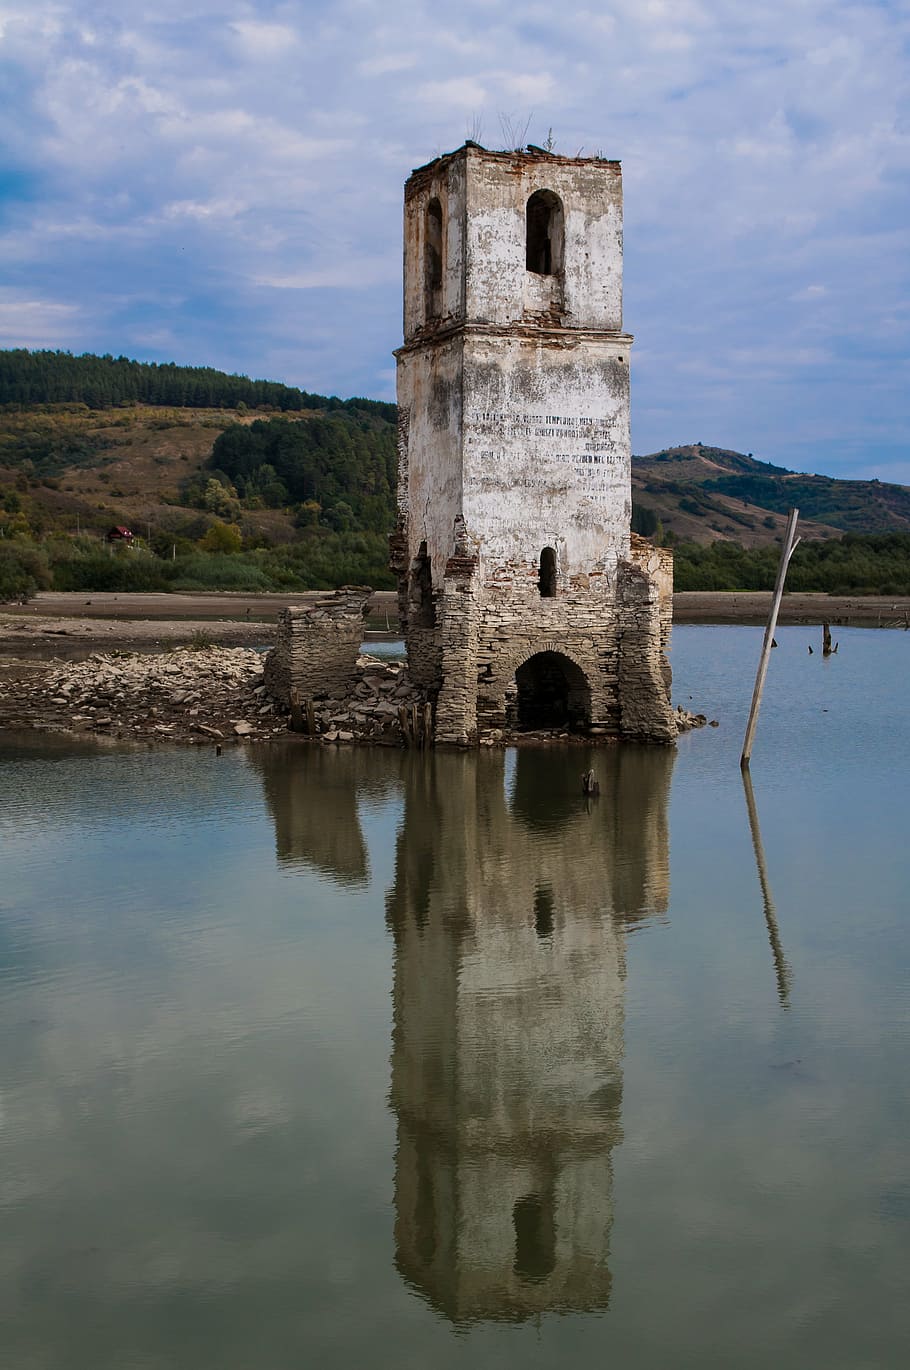 concrete, tower, water, church, abandoned, old, architecture, building, ruins, structure